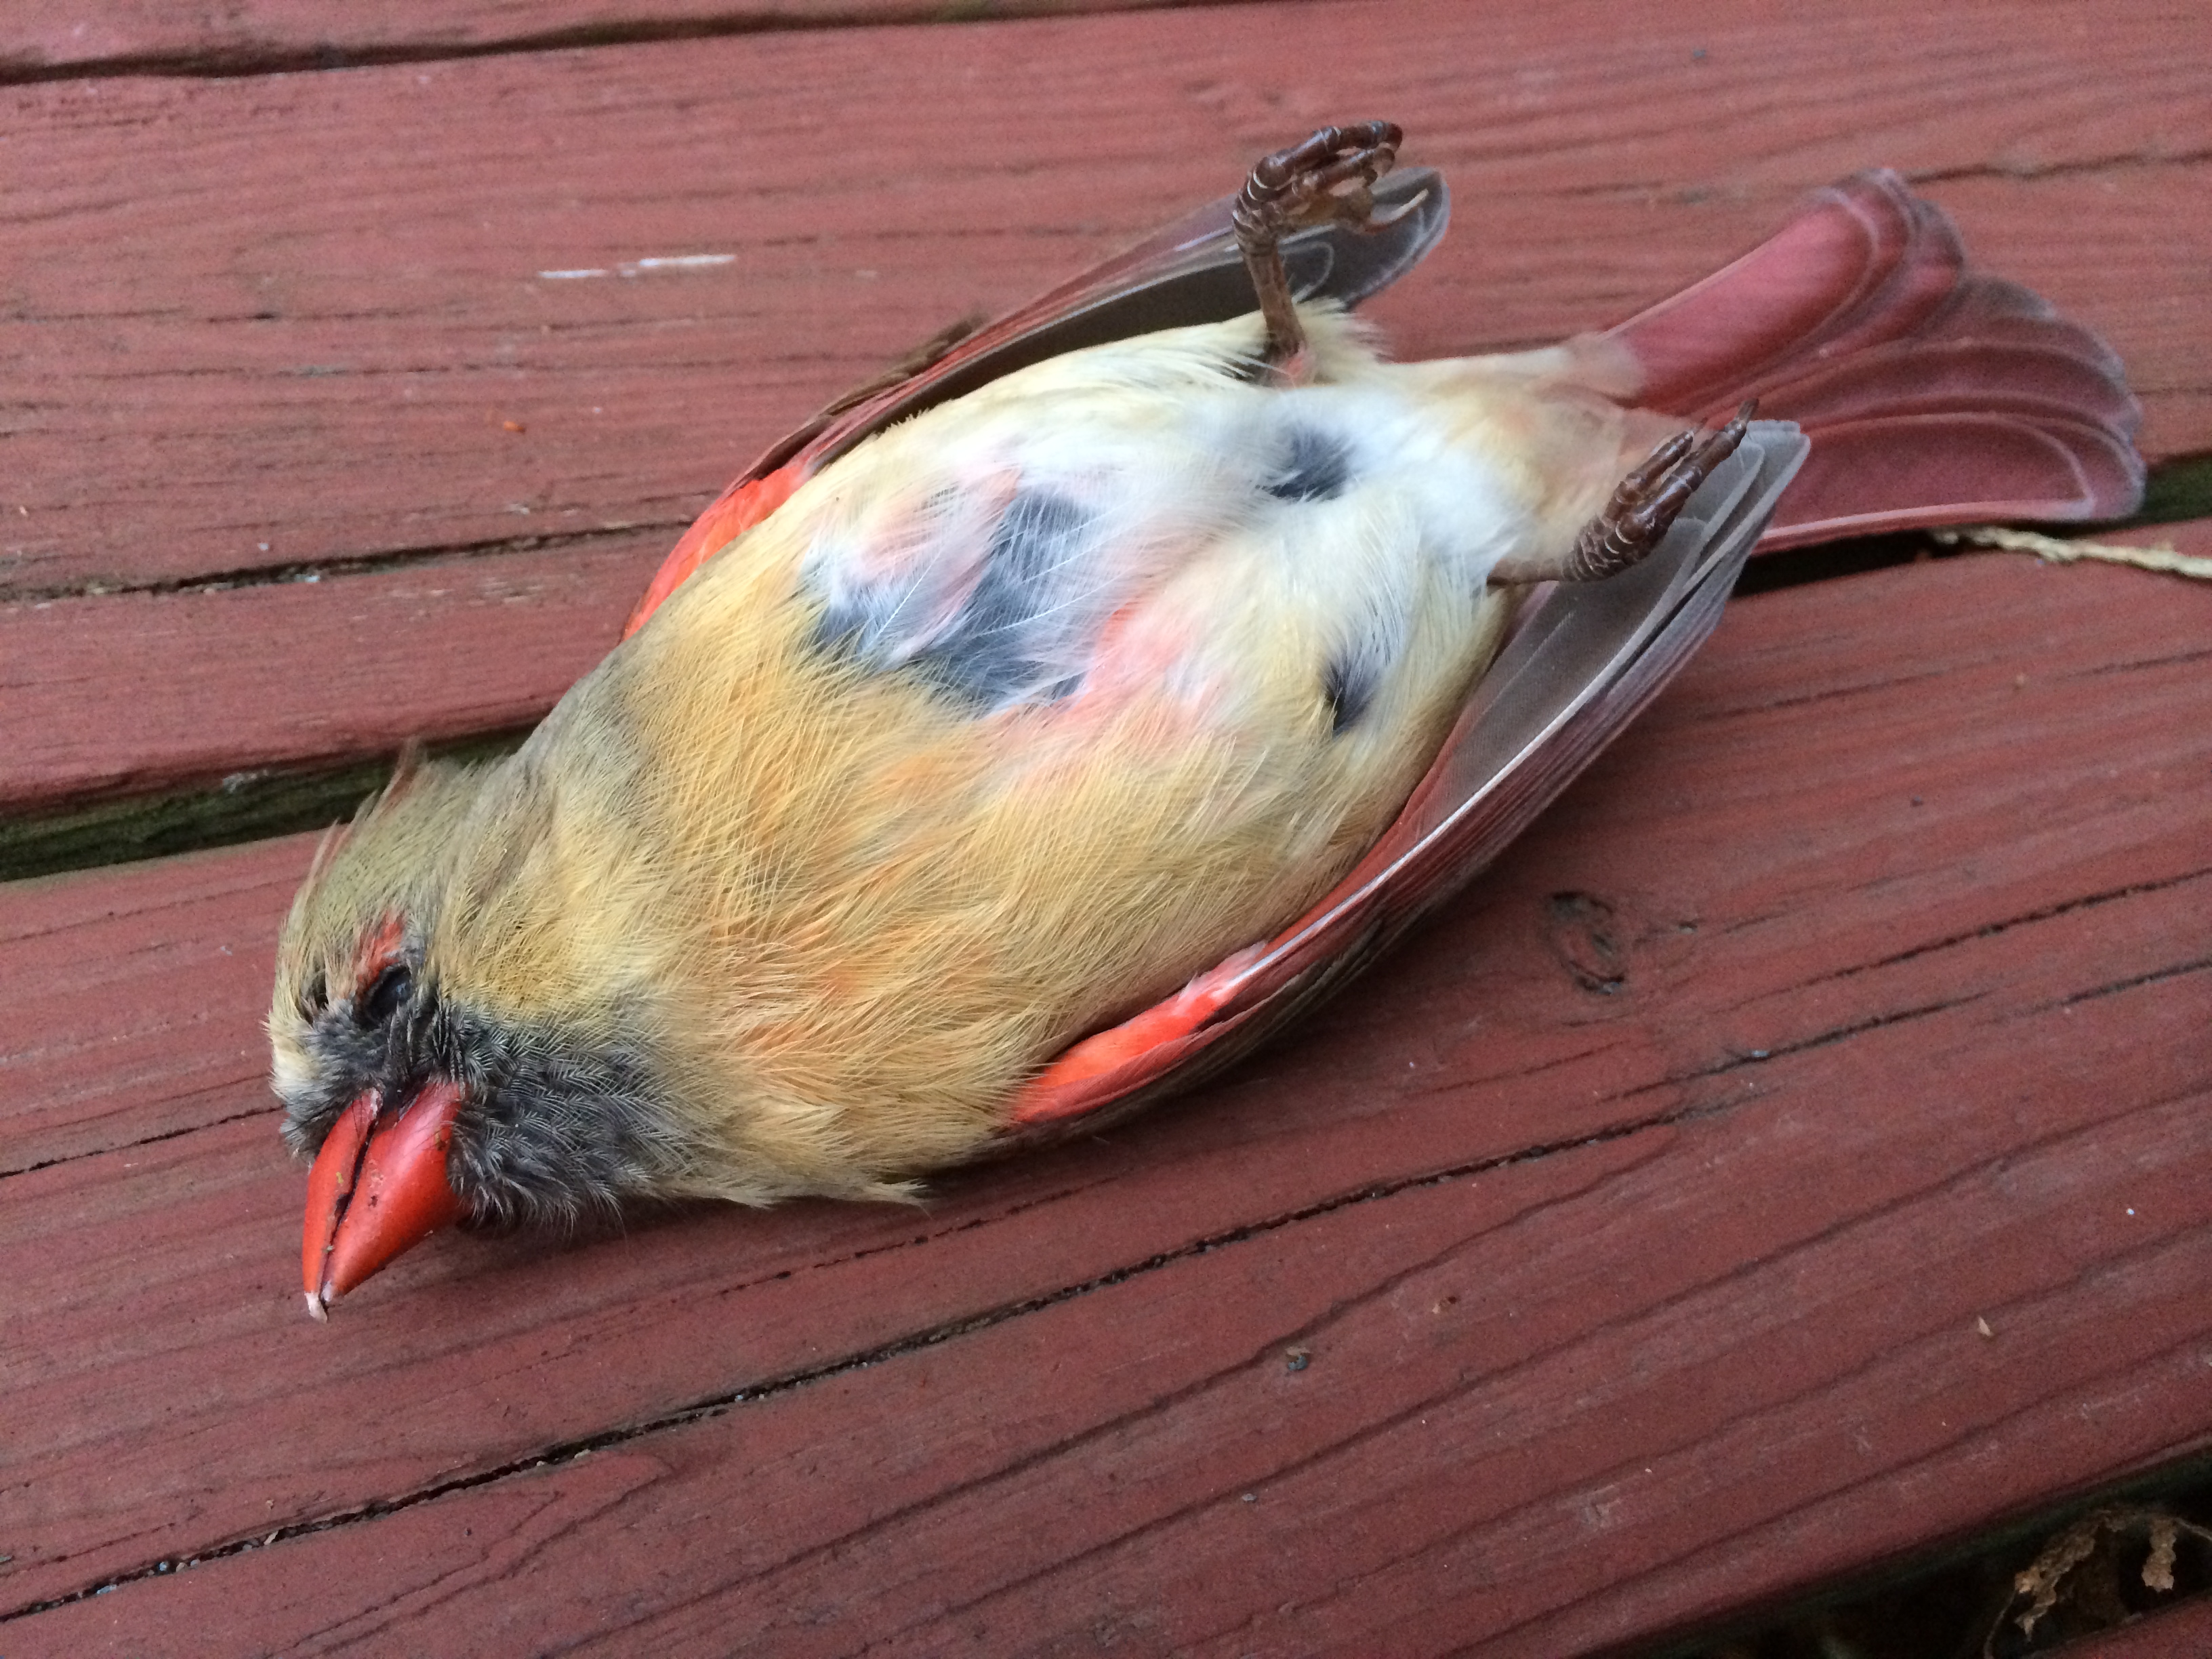 She lies dead on my back deck. This pretty female cardinal. Perhaps a sign of things to come. But, what?